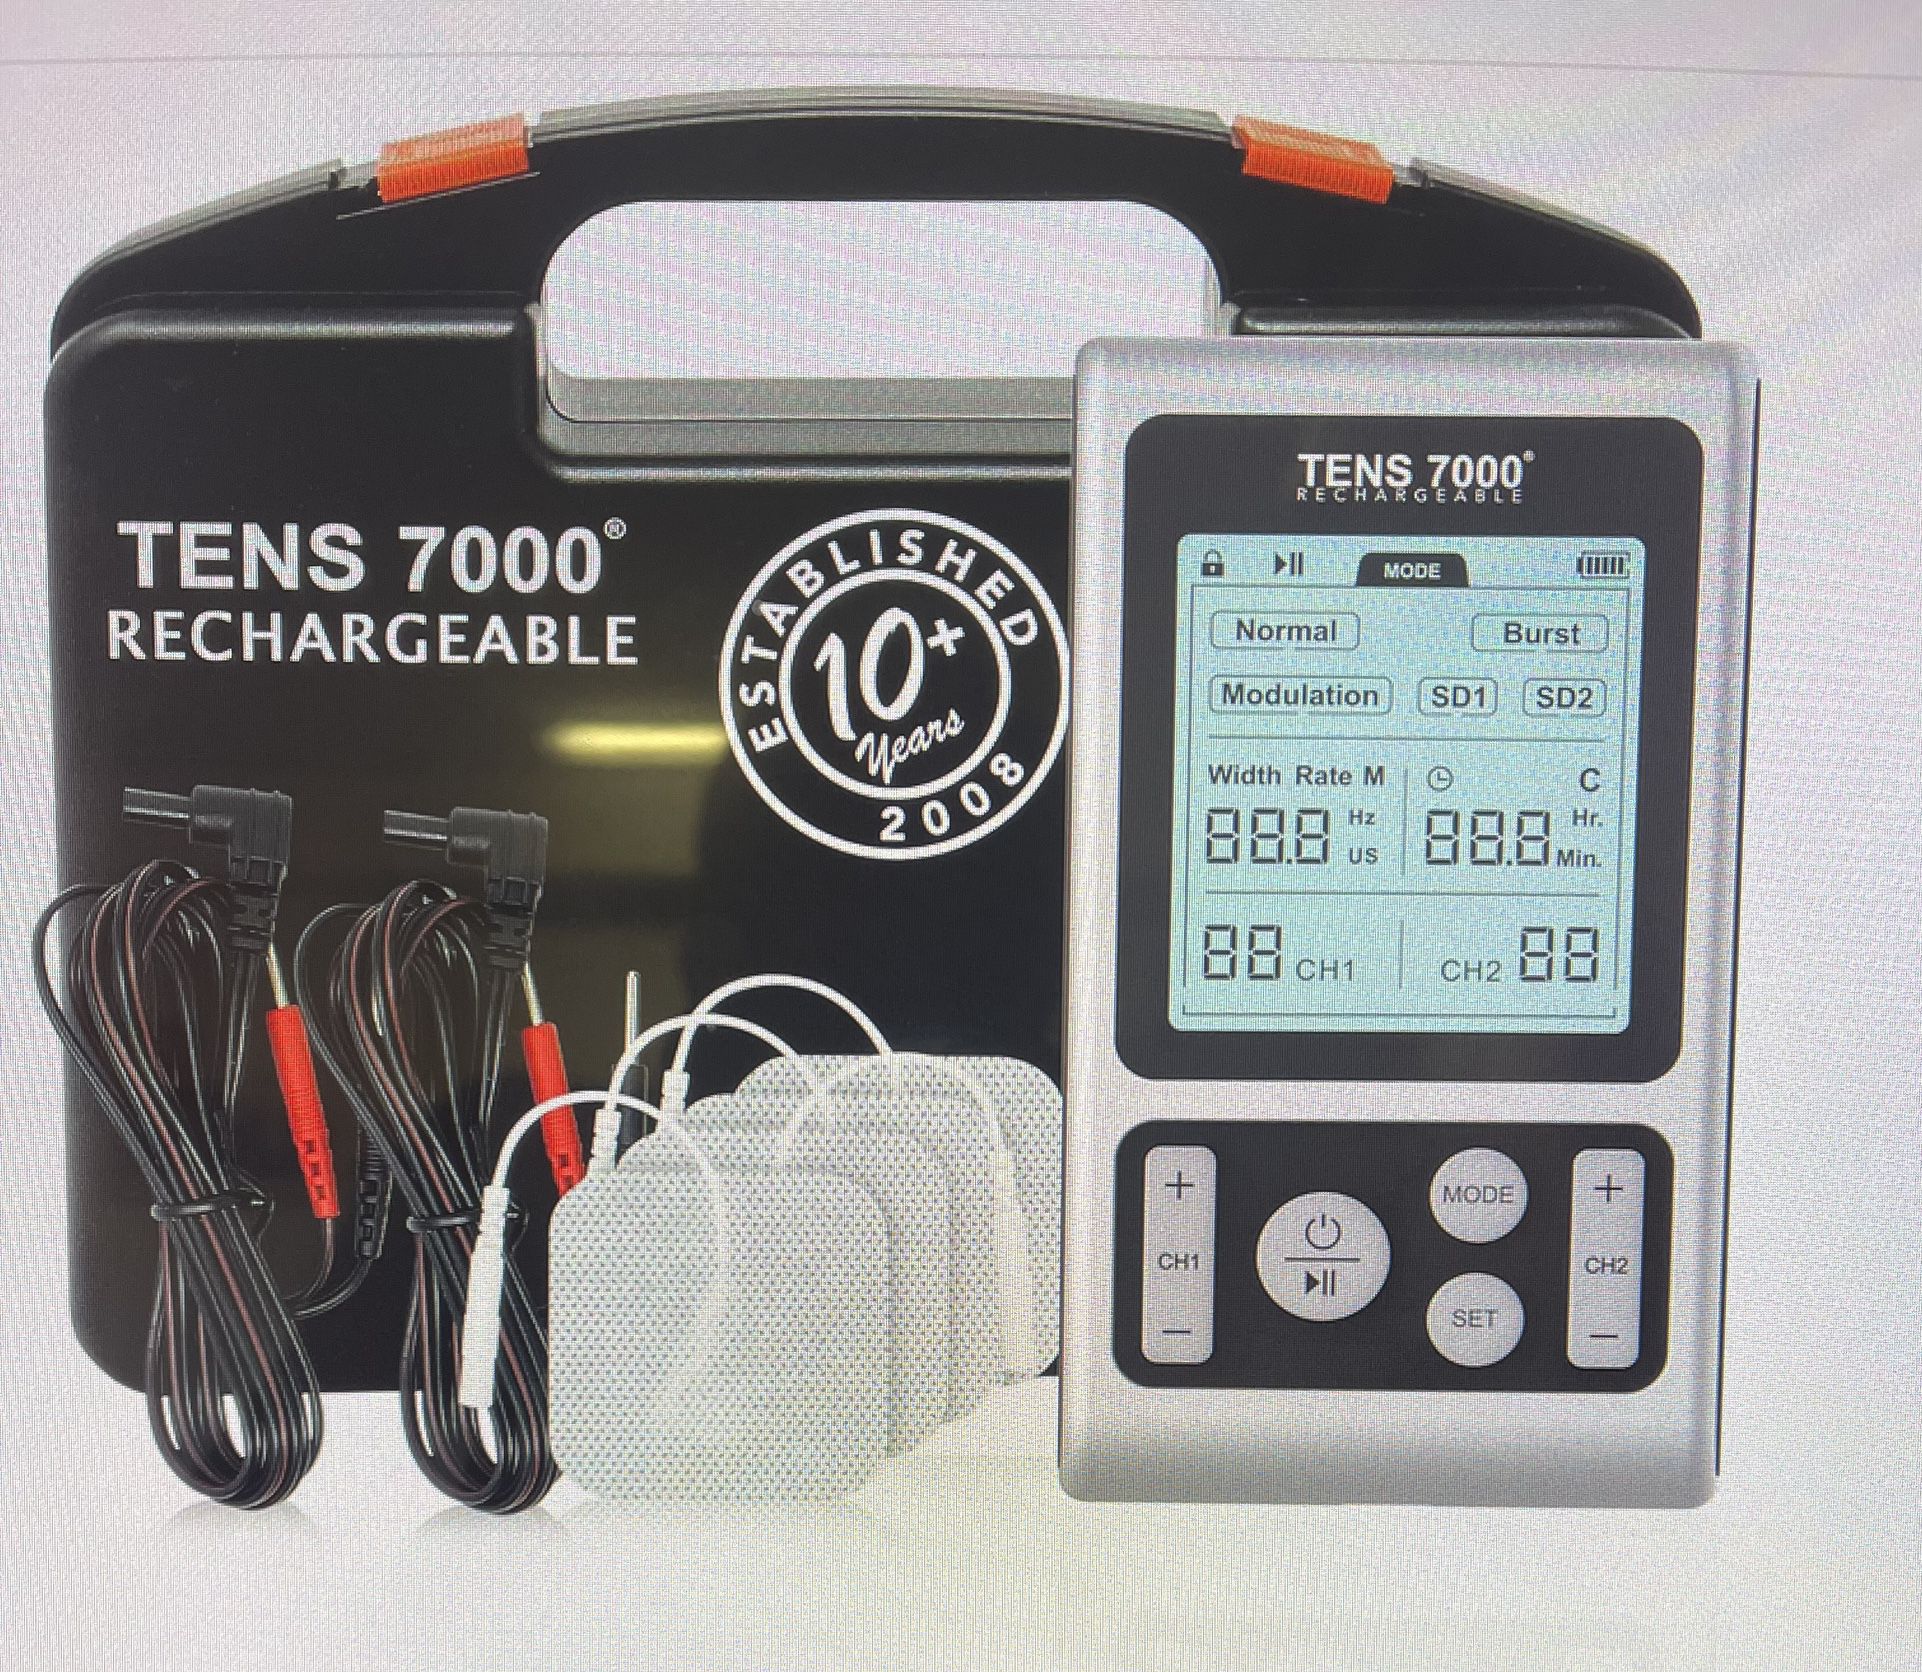 TENS 7000 Rechargeable Unit Muscle Stimulator and Pain Relief Device